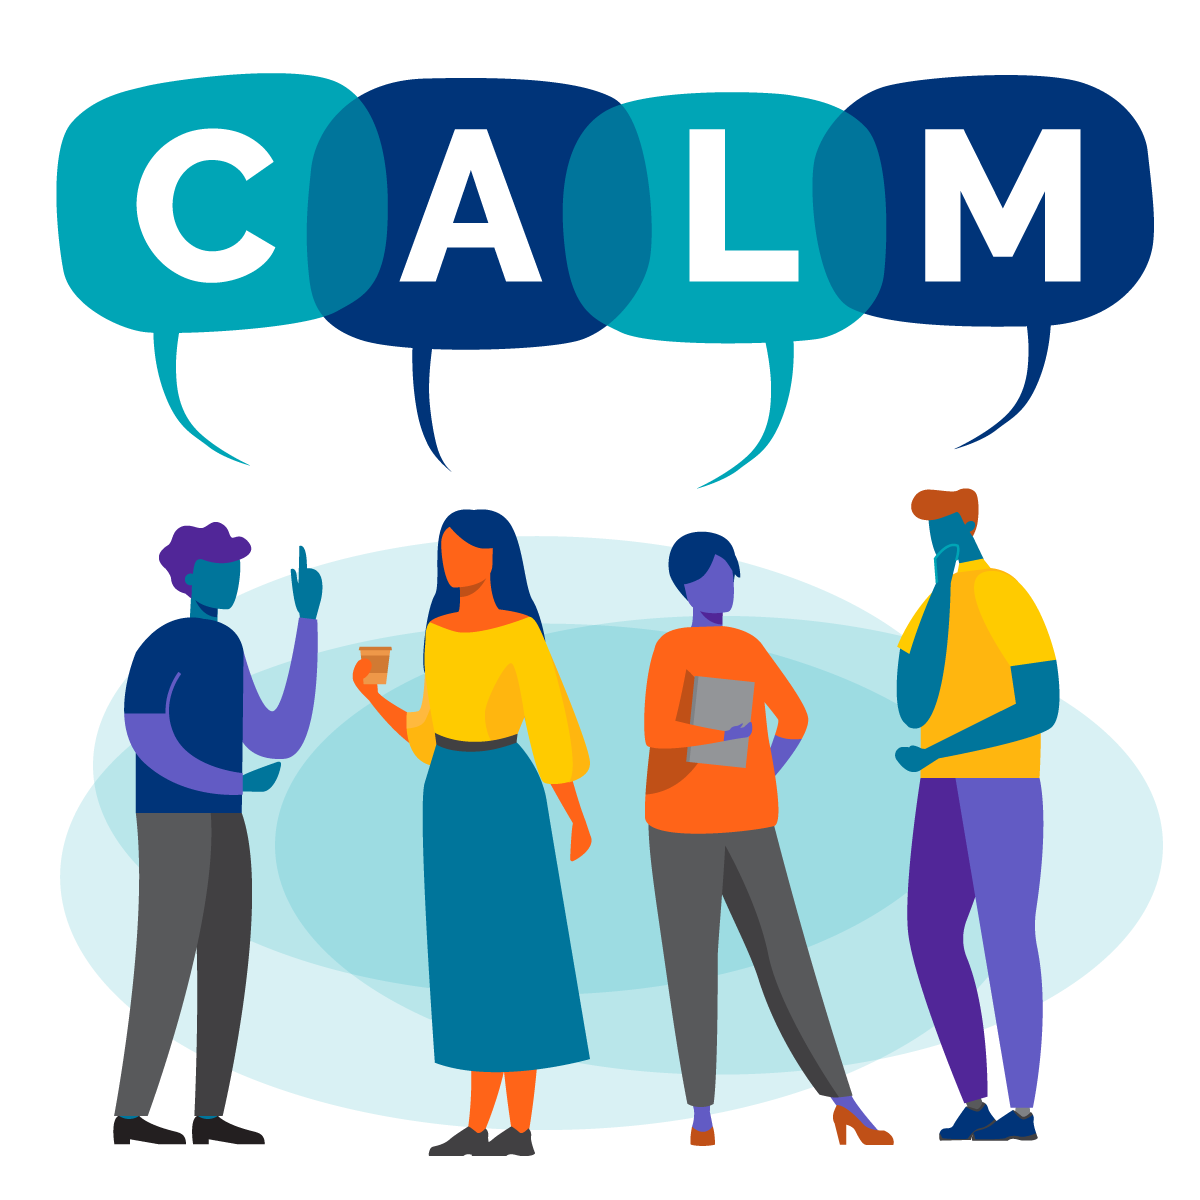 Four multicolored people standing and talking to each other in front of an abstract blue shape in the background. The word "CALM" is spelled out above their heads in blue speech bubbles.